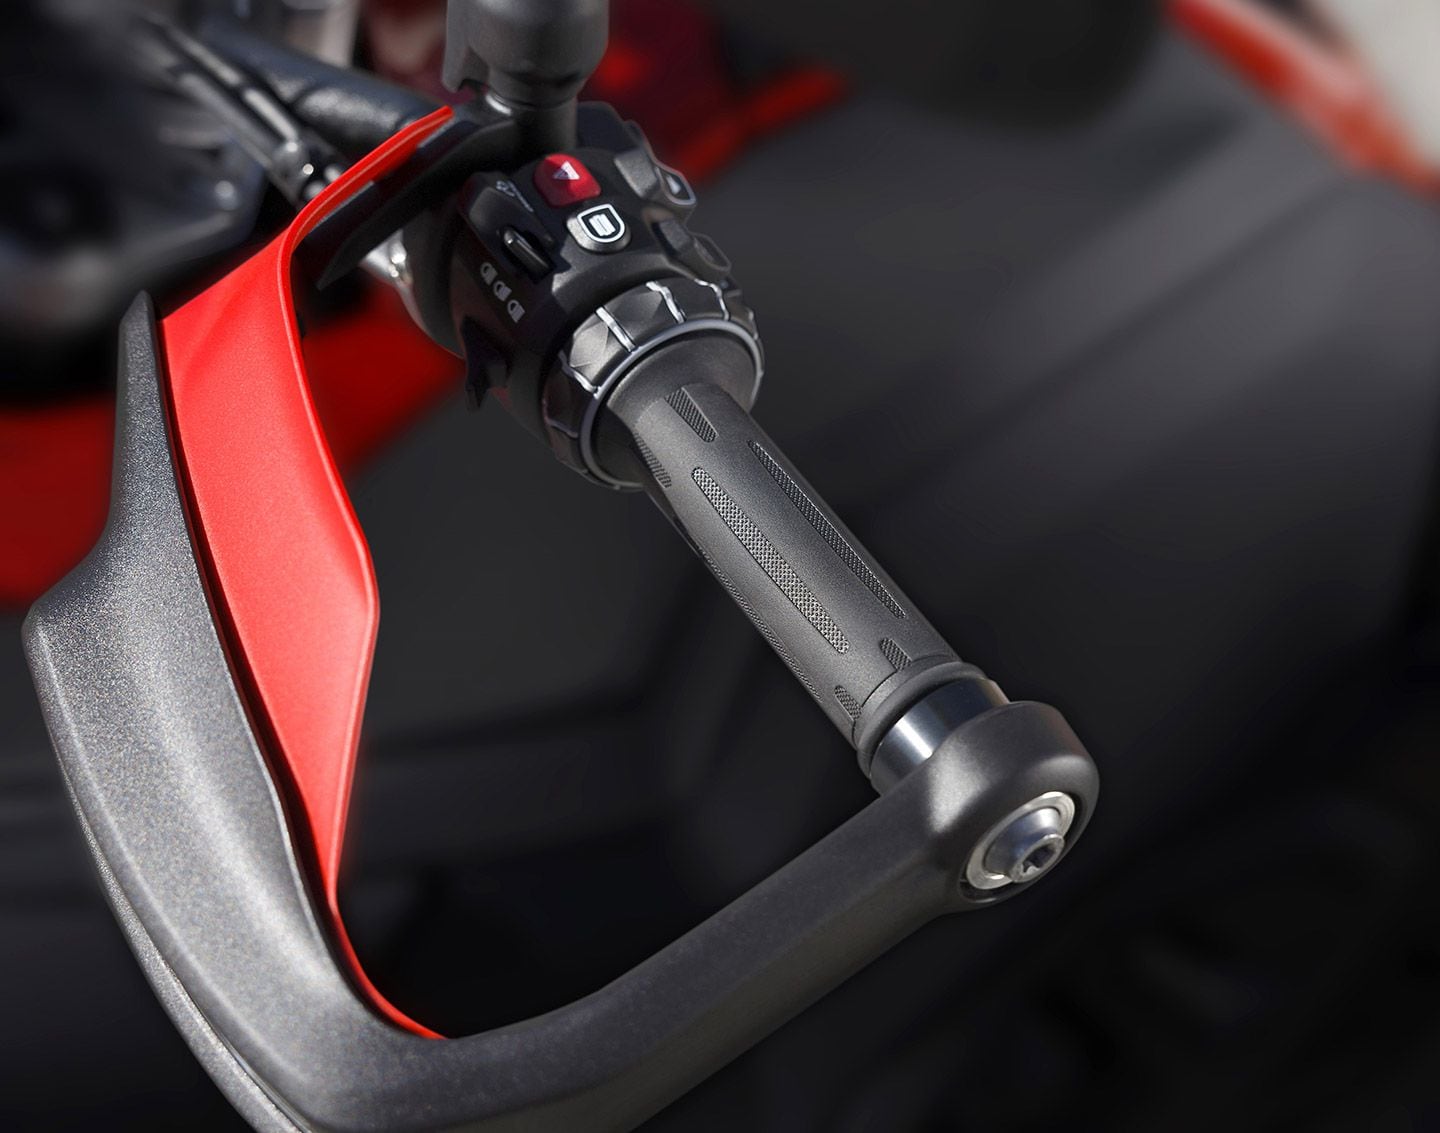 WIth the ASA, BMW has taken the clutch lever completely out of the equation. No word on which models will have the tech, but it will be available later this year.